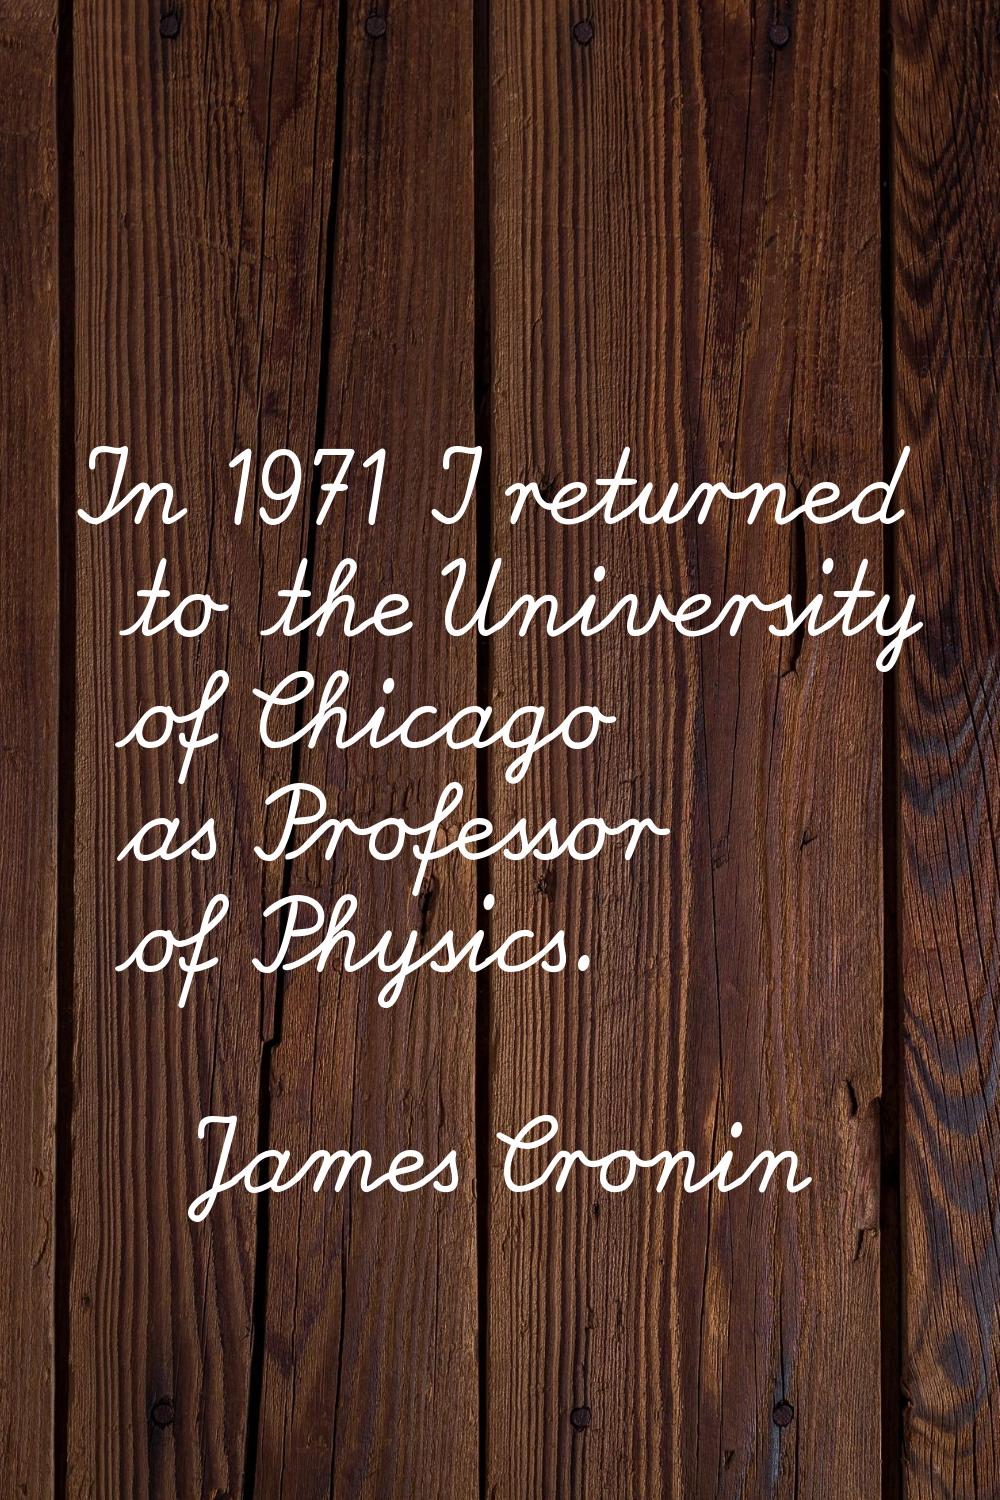 In 1971 I returned to the University of Chicago as Professor of Physics.